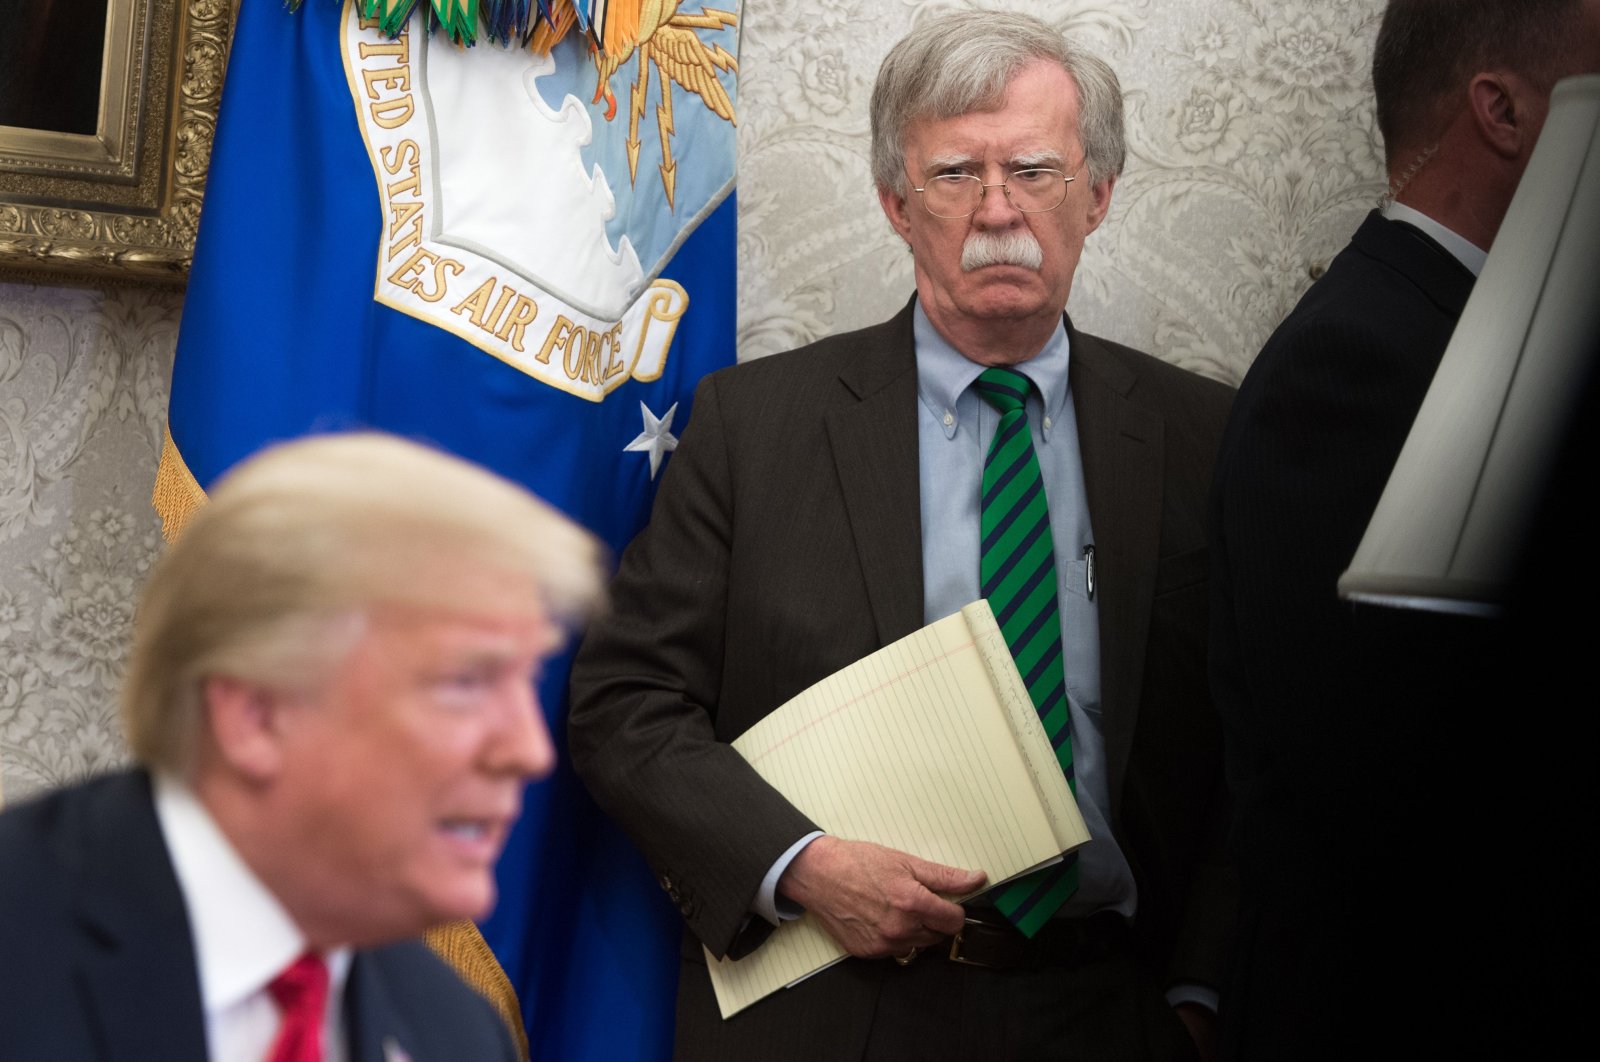 Former U.S. national security adviser John Bolton stands alongside President Donald Trump in the Oval Office of the White House, Washington, D.C., May 17, 2018. (AFP Photo)